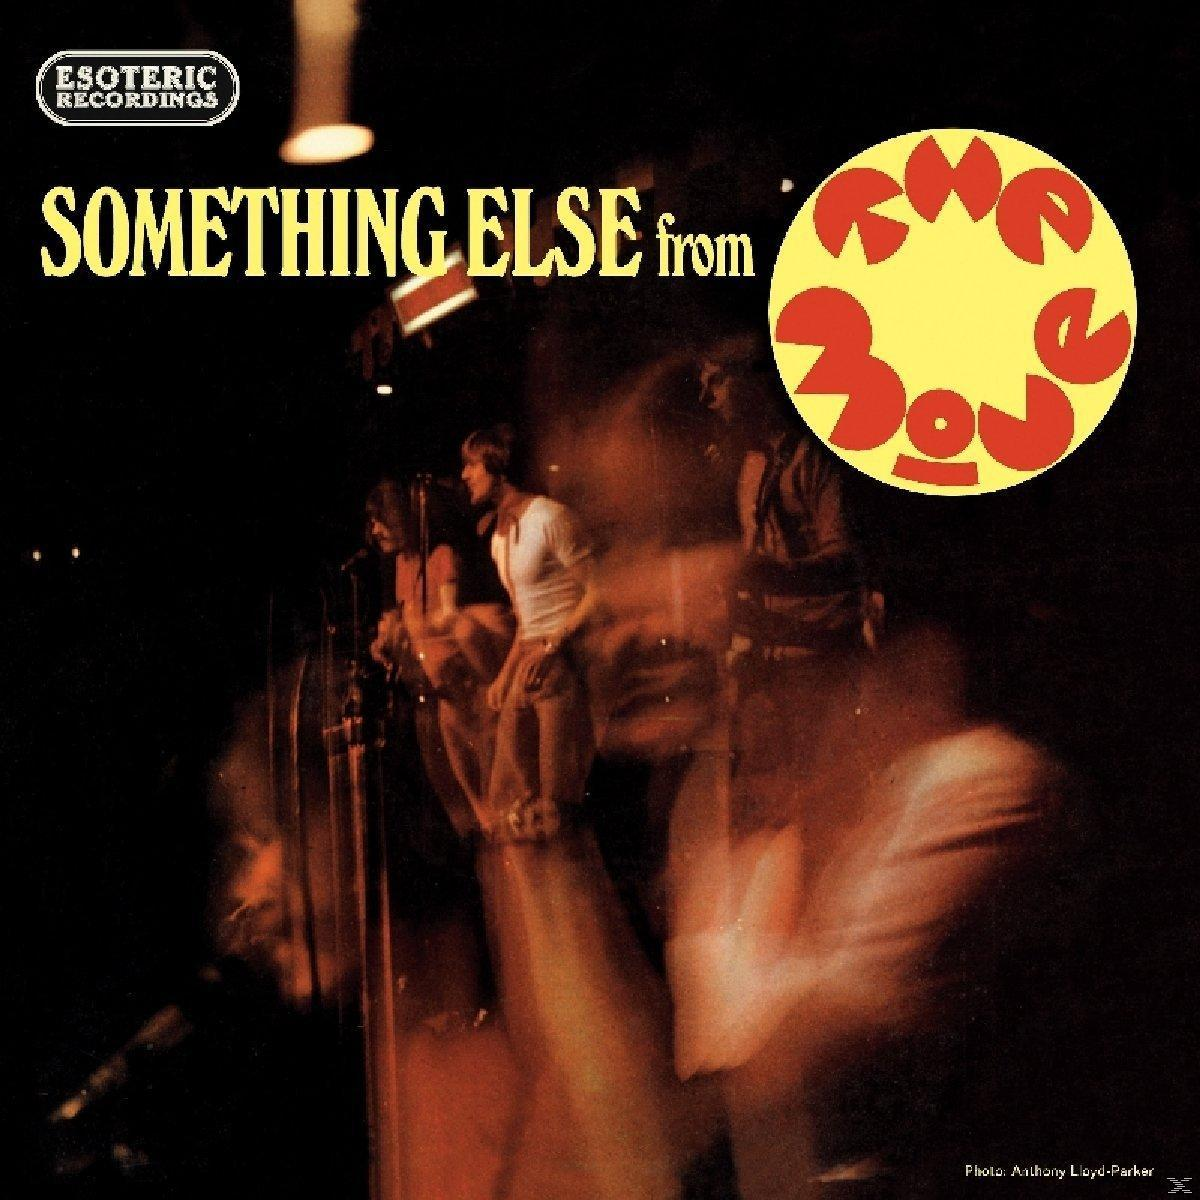 The Move - Something - (CD) The Move From Else